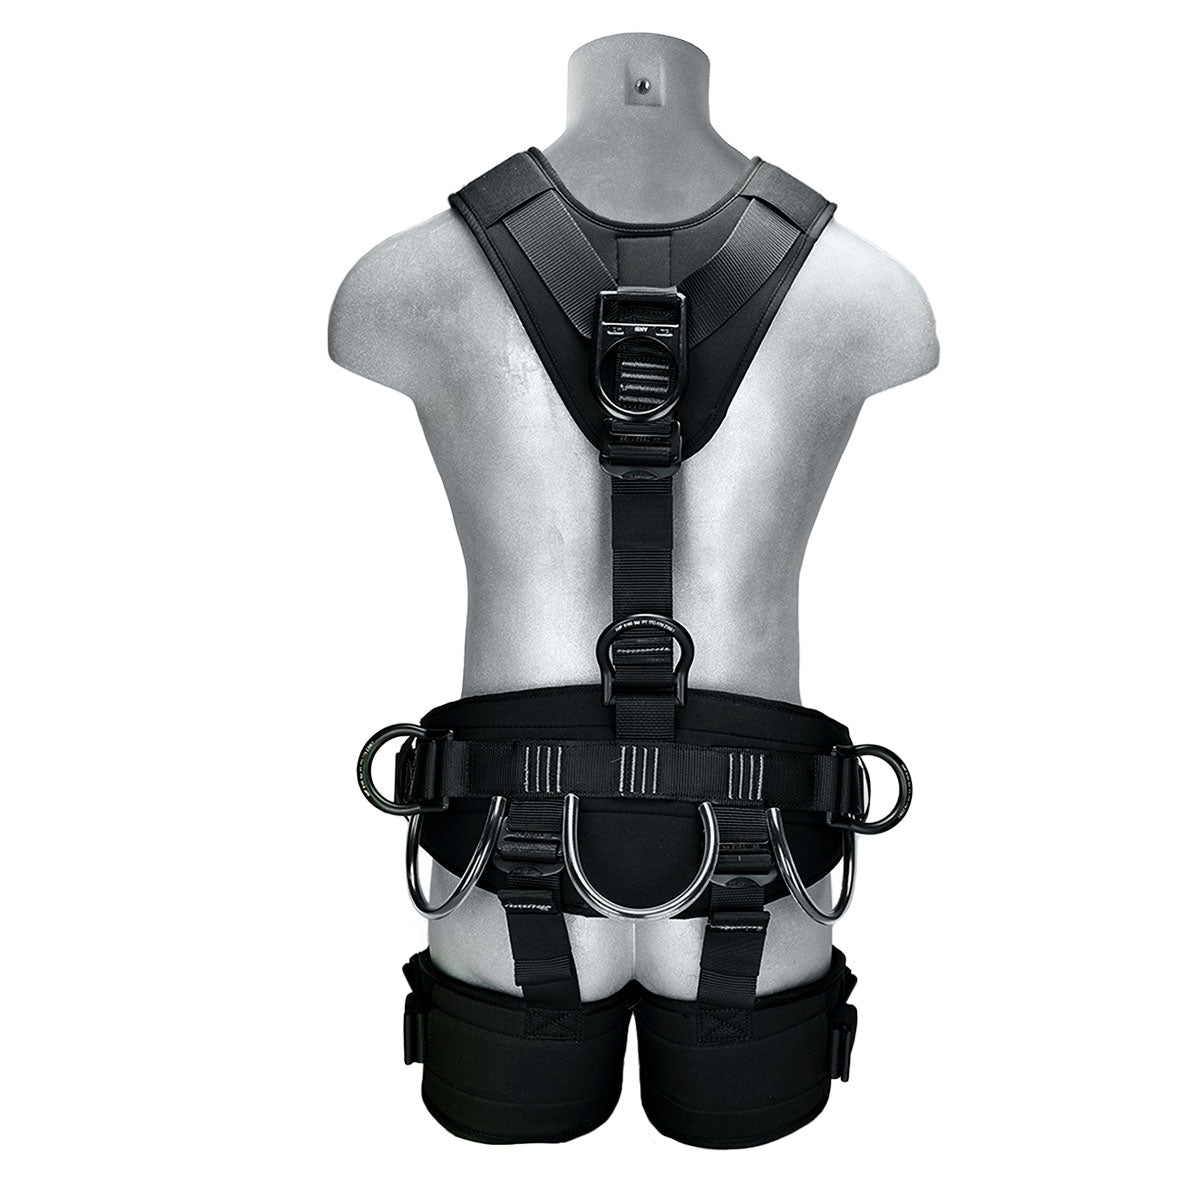 Built for the Job, Built for You: The Jupiter Rope Access Professional Harness - Fusion Climb